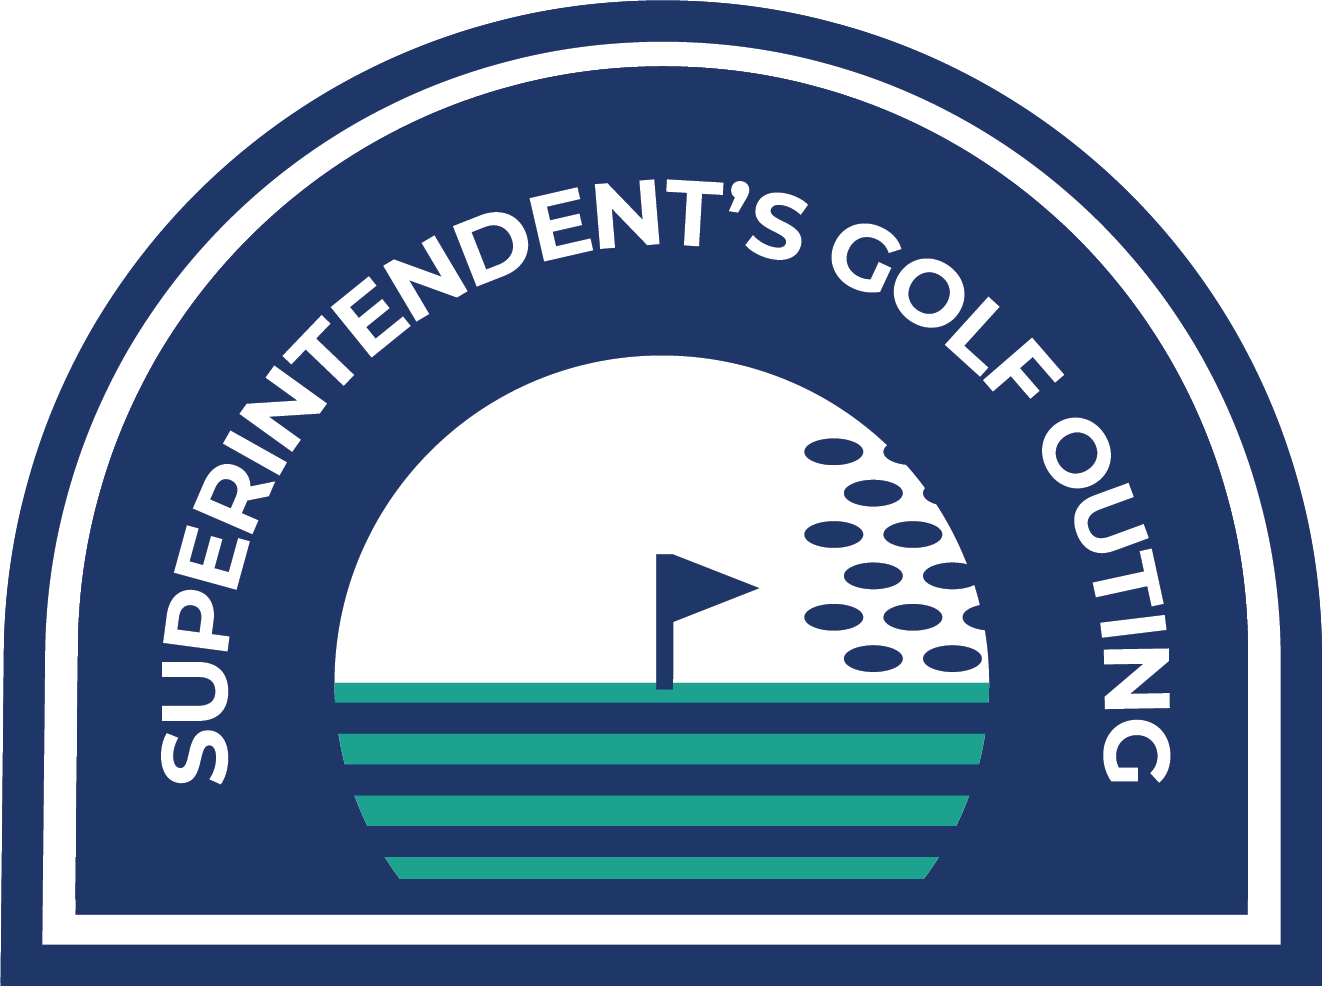 Golf%20Outing%20Logo.png